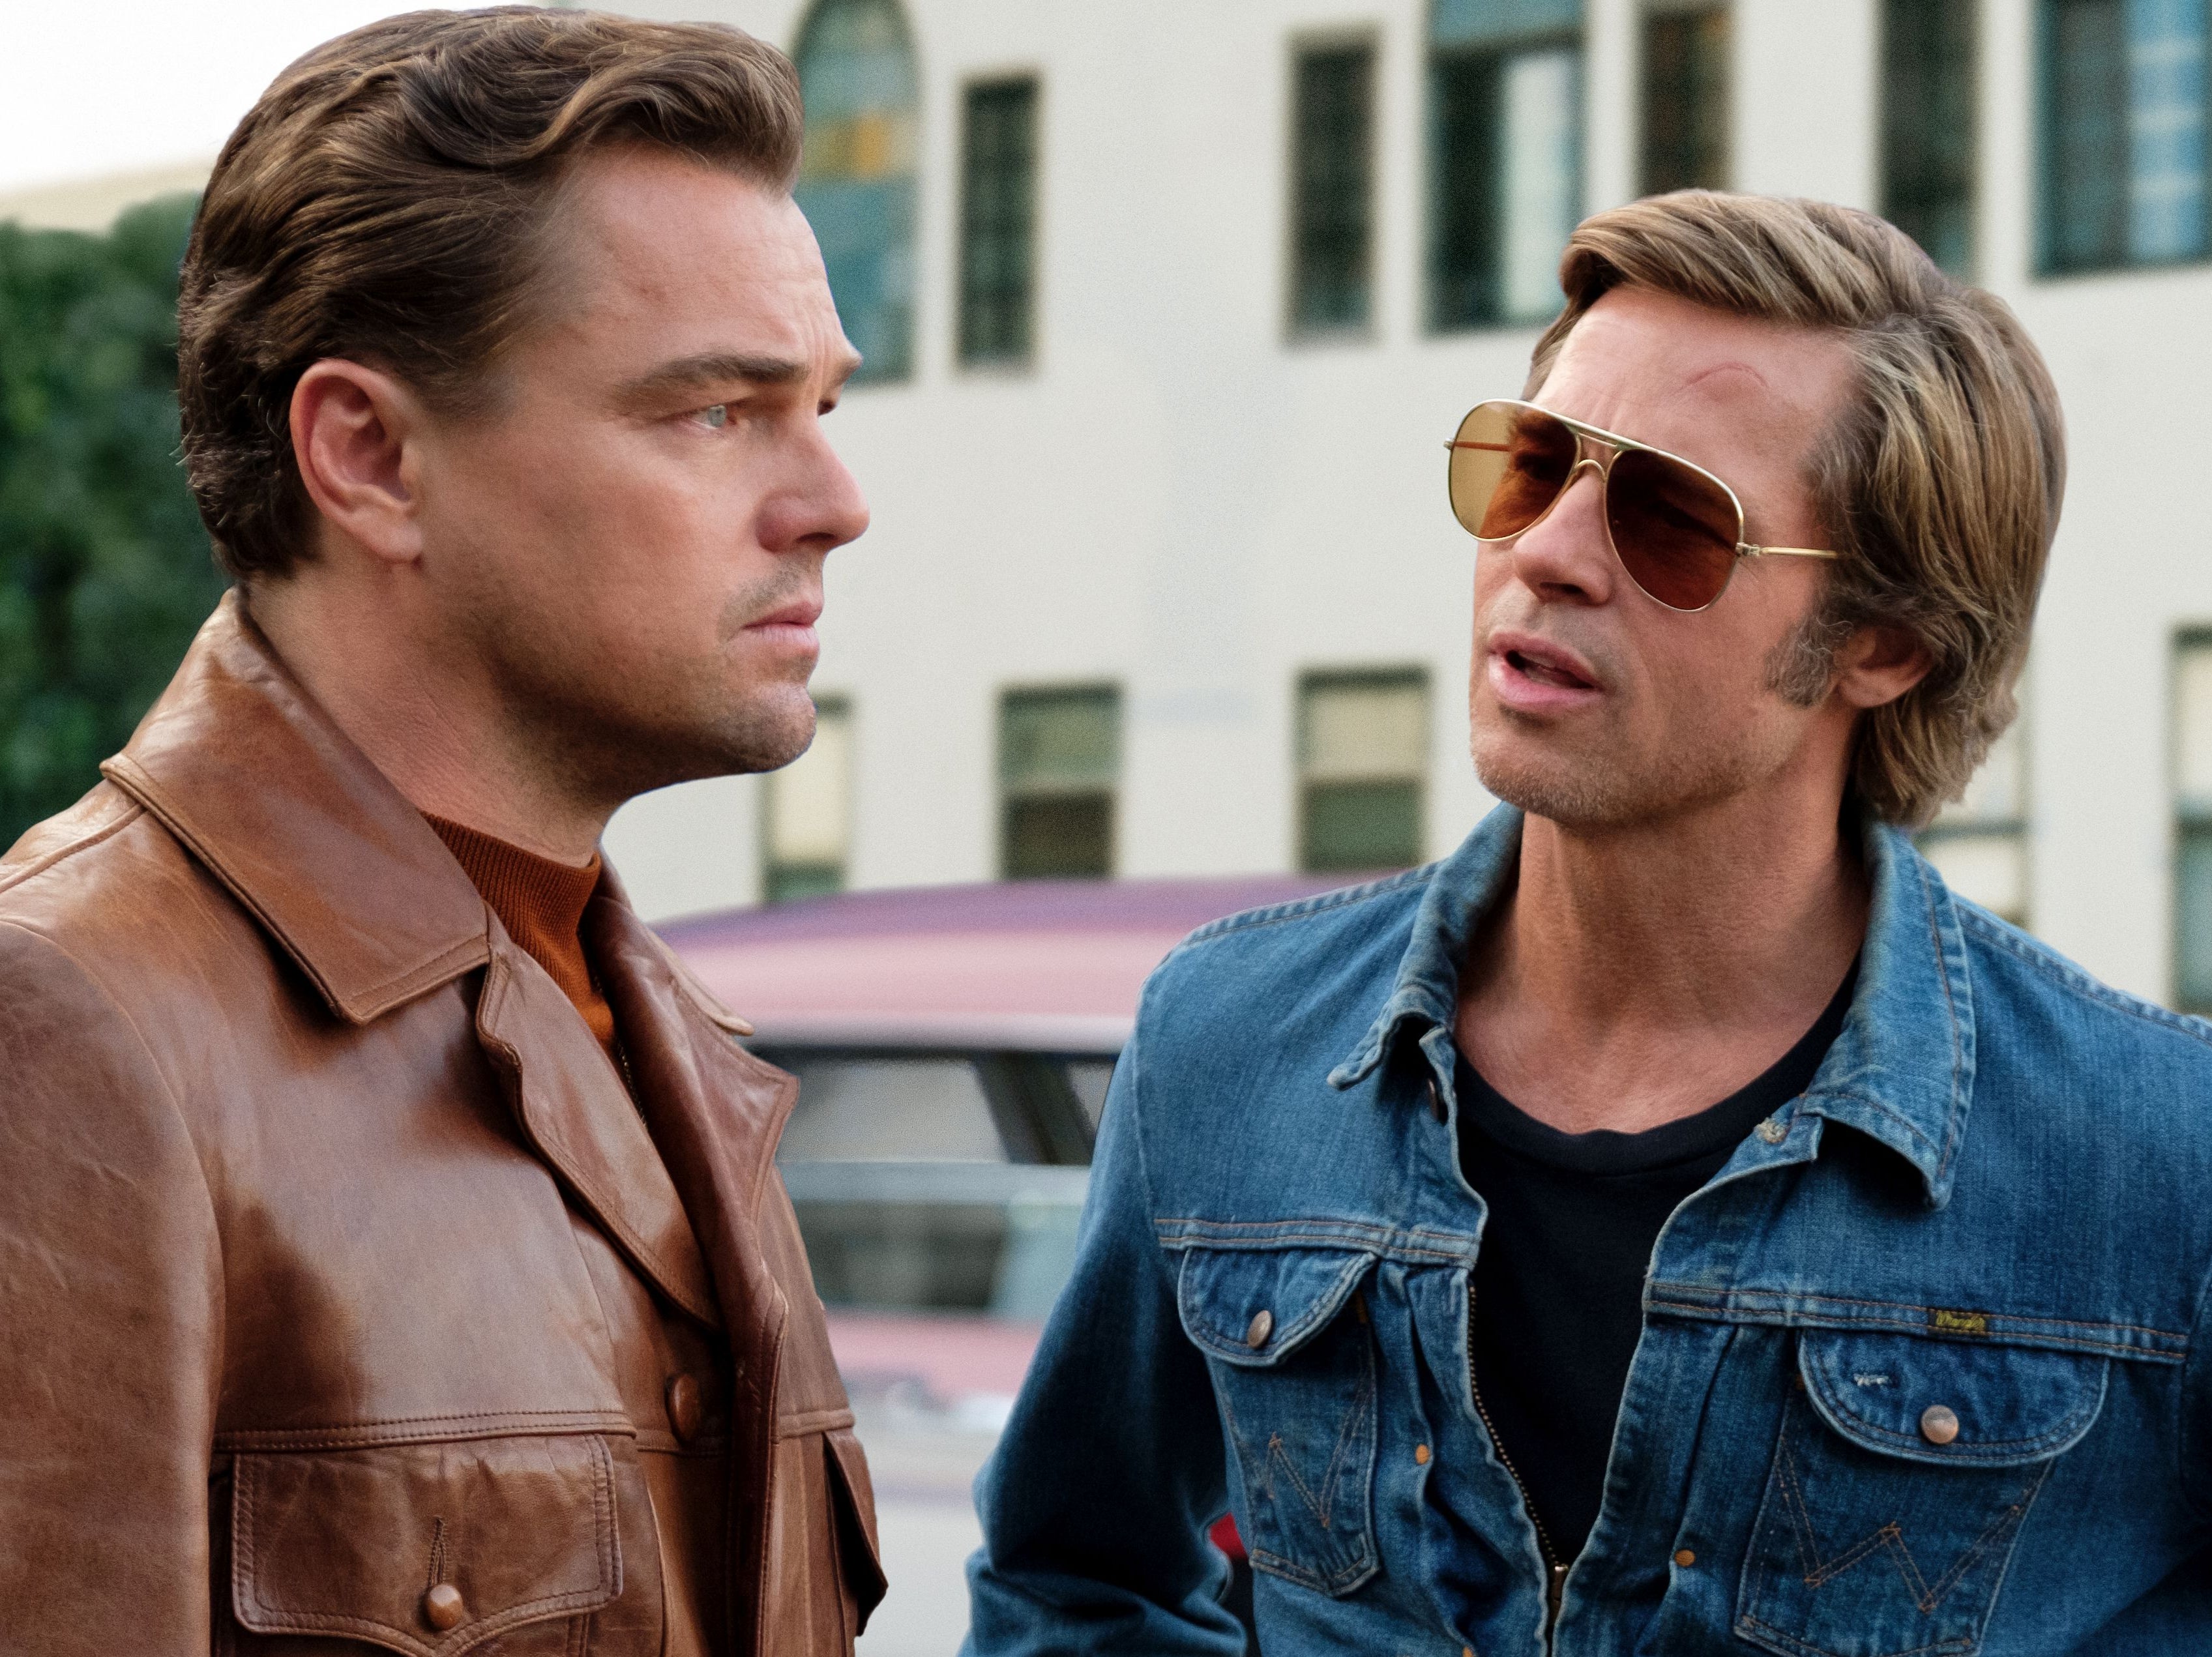 Leonardo DiCaprio and Brad Pitt in ‘Once Upon A Time in Hollywood’